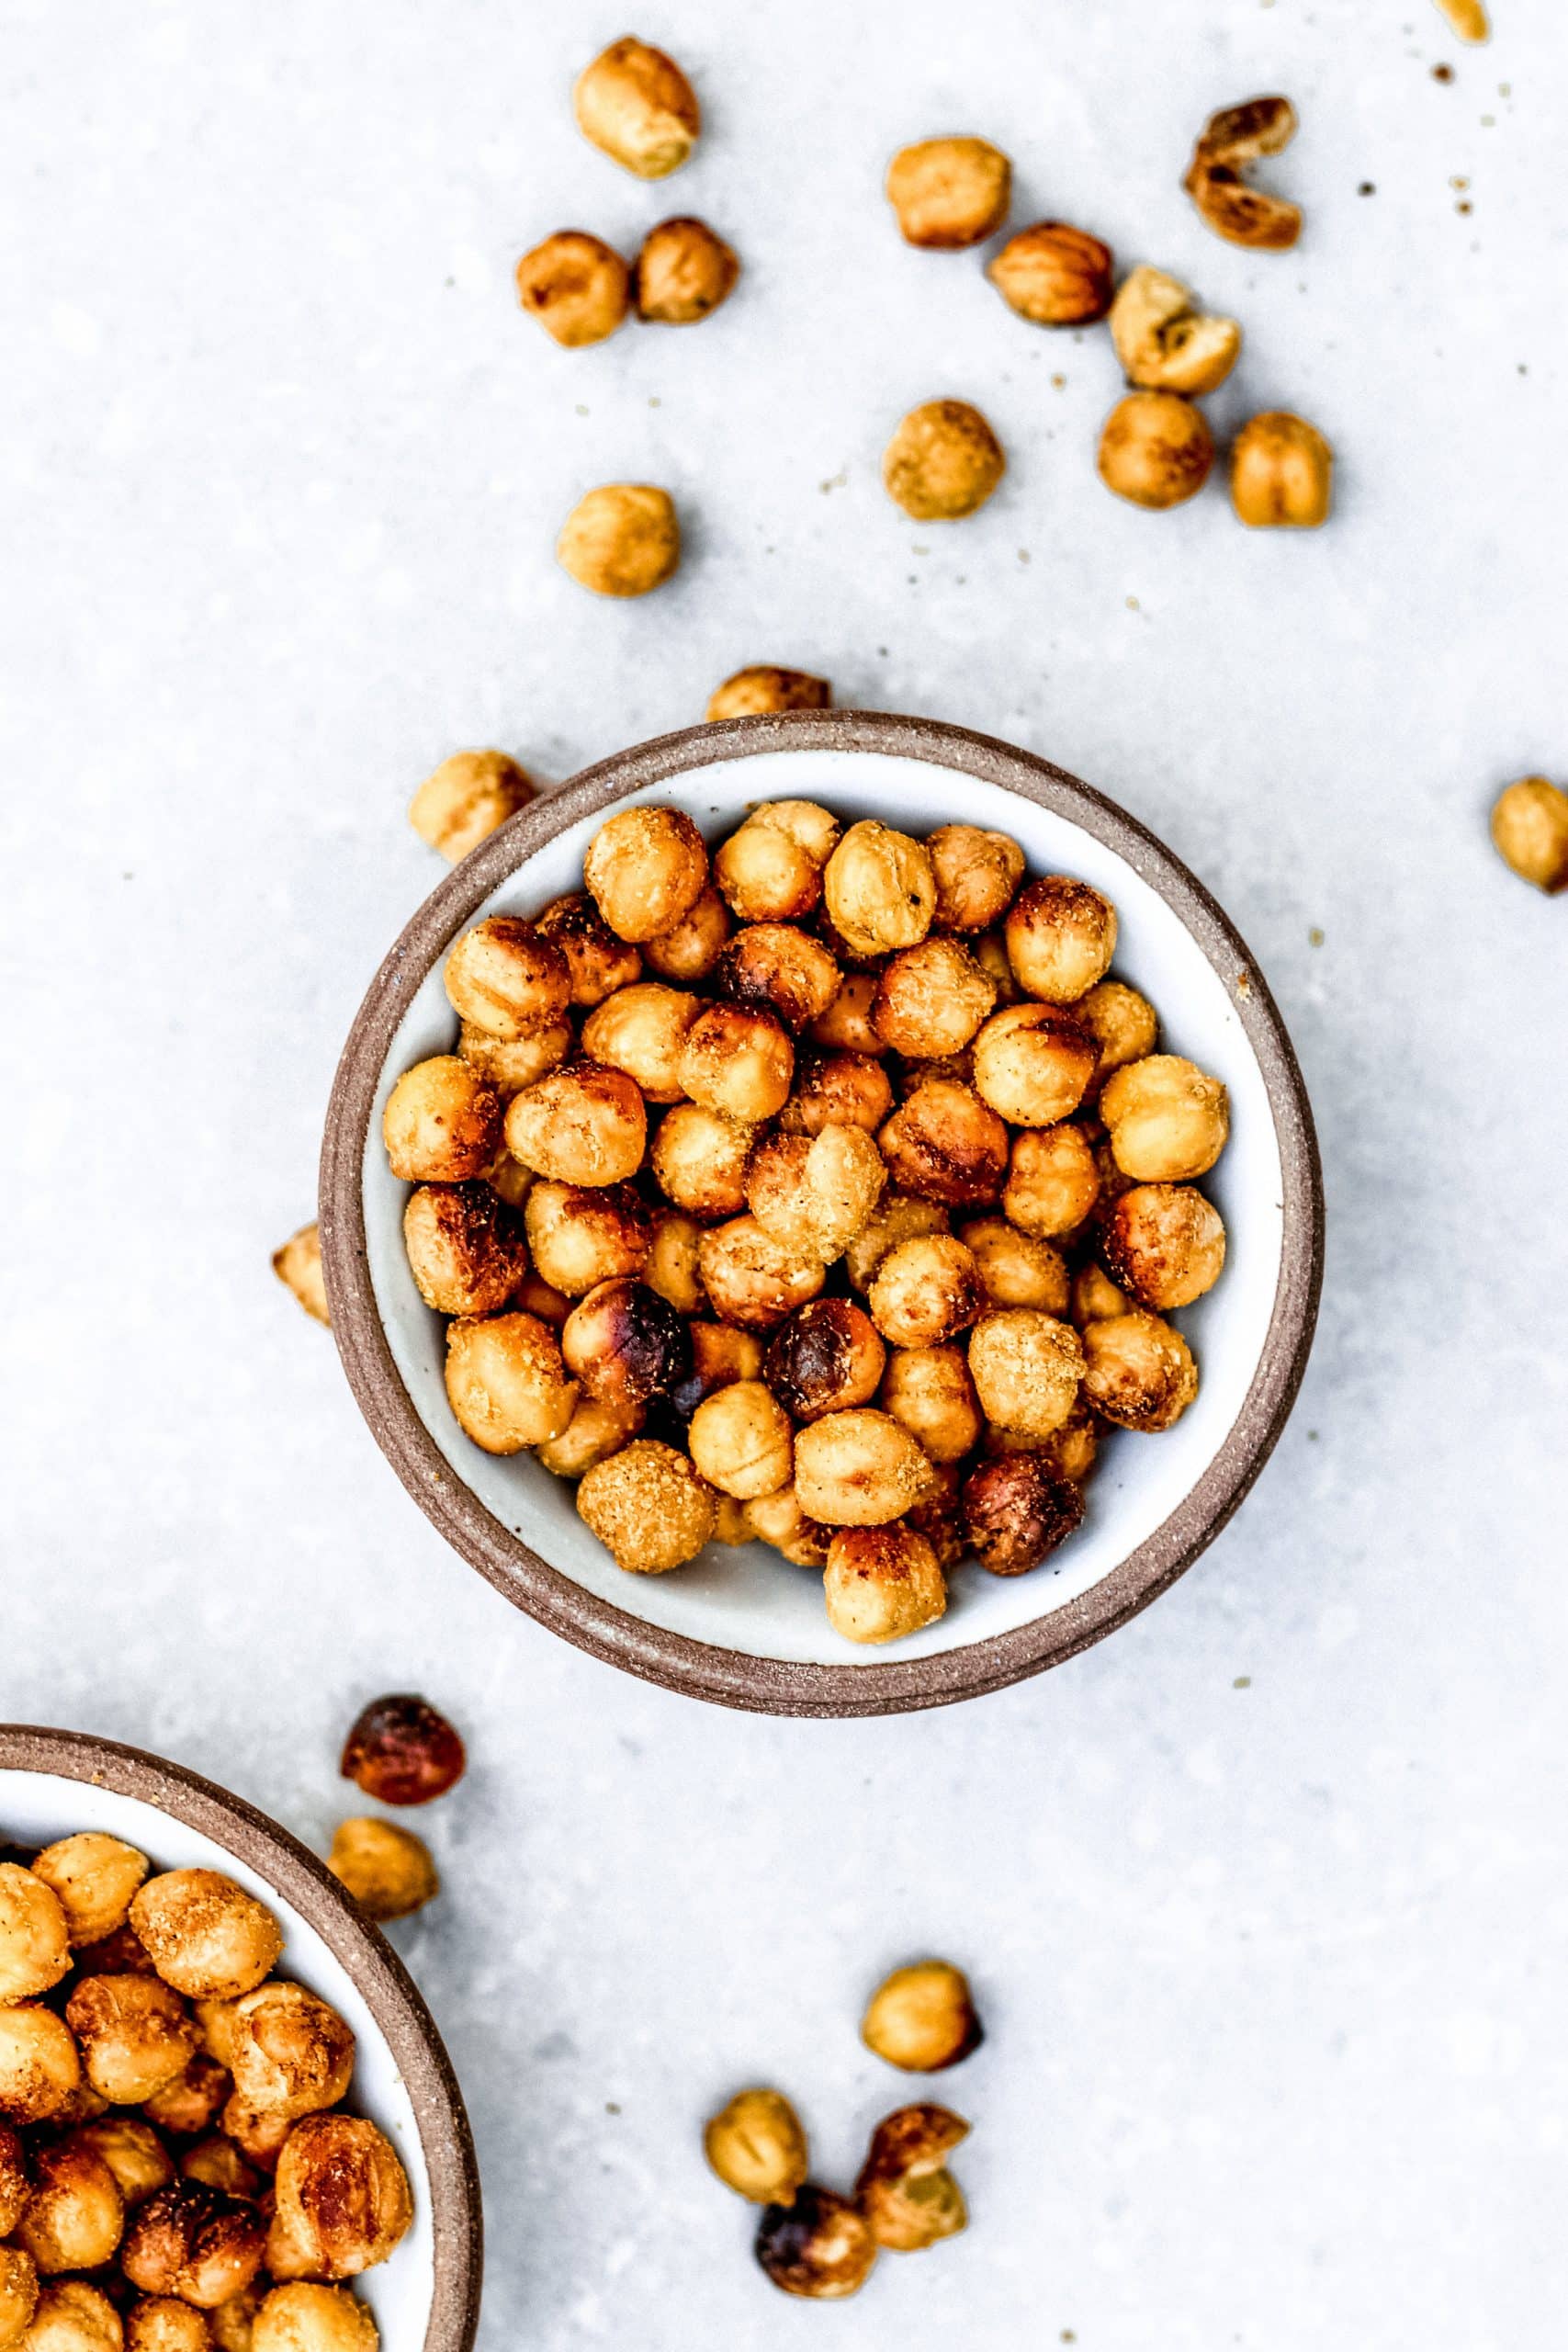 Bowl of cheesy roasted chickpeas on a gray background.